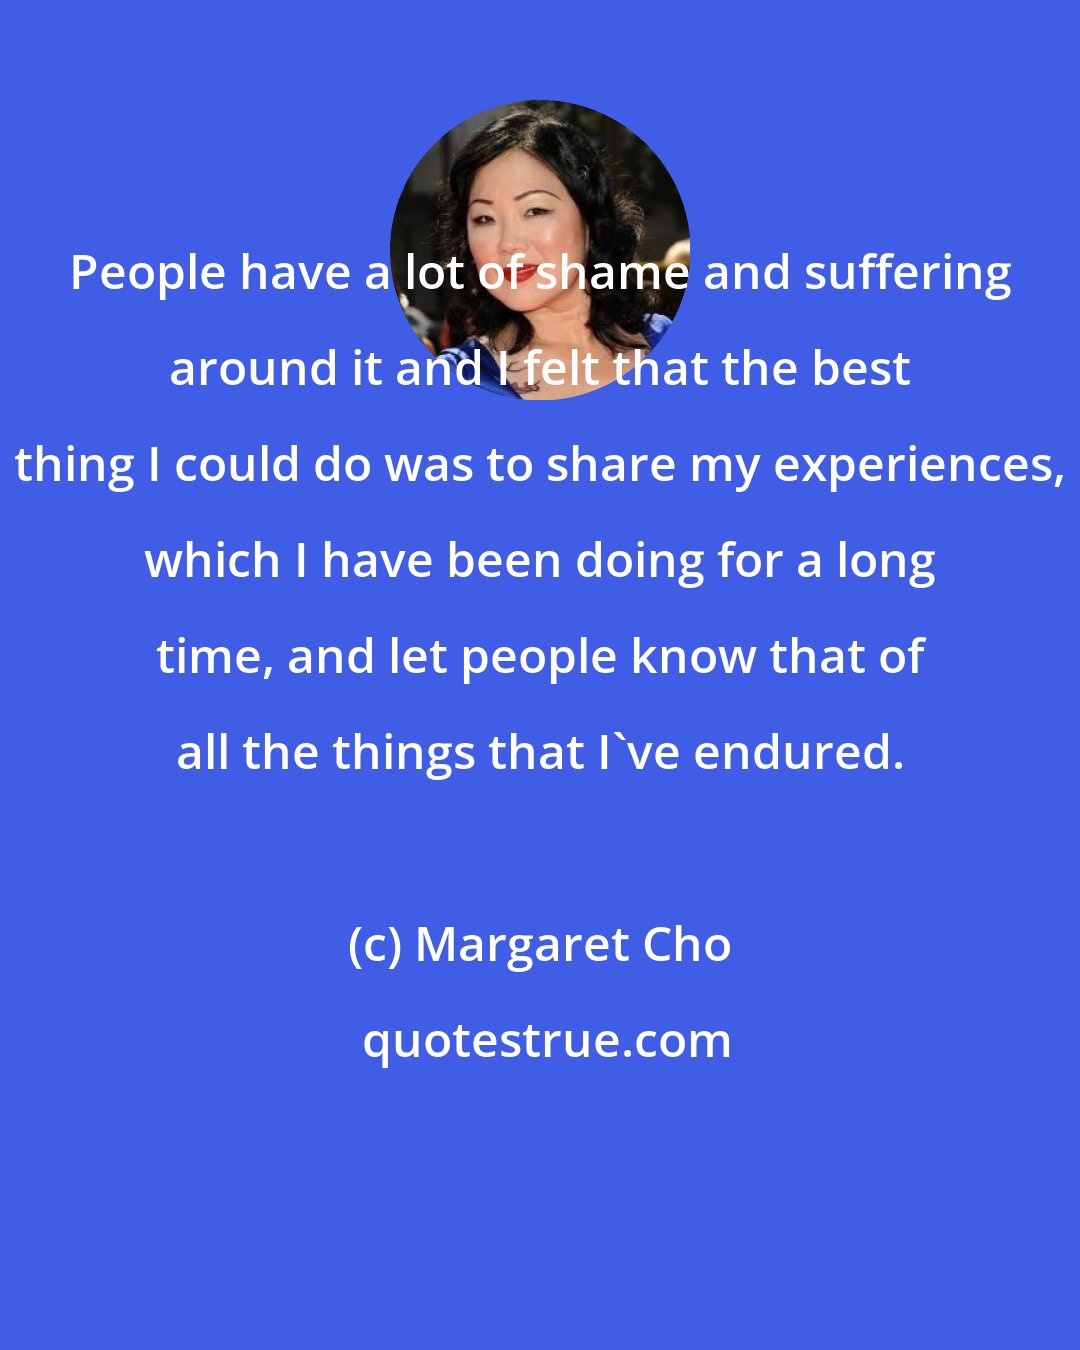 Margaret Cho: People have a lot of shame and suffering around it and I felt that the best thing I could do was to share my experiences, which I have been doing for a long time, and let people know that of all the things that I've endured.